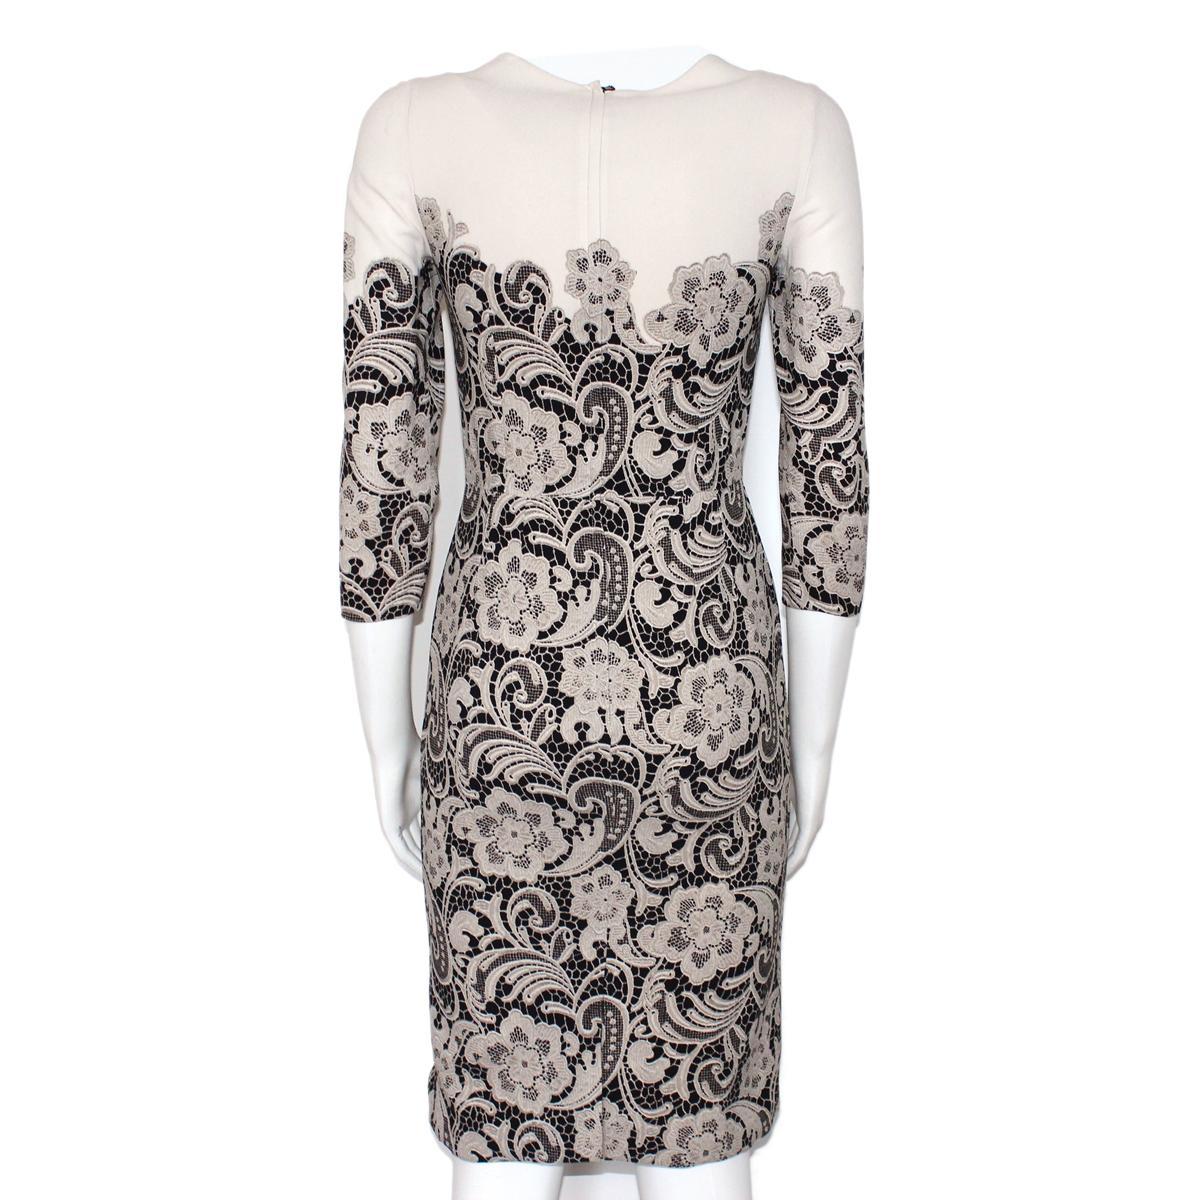 Iconic & chic dress by Dolce & Gabbana
Silk
Cream, beige and black colors
Lace printed
3/4 sleeve
Total lenght (shoulder/hem) cm 94 (37 inches)
Shoulder length cm 34 (13,4 inches)
Worldwide express shipping included in the price !